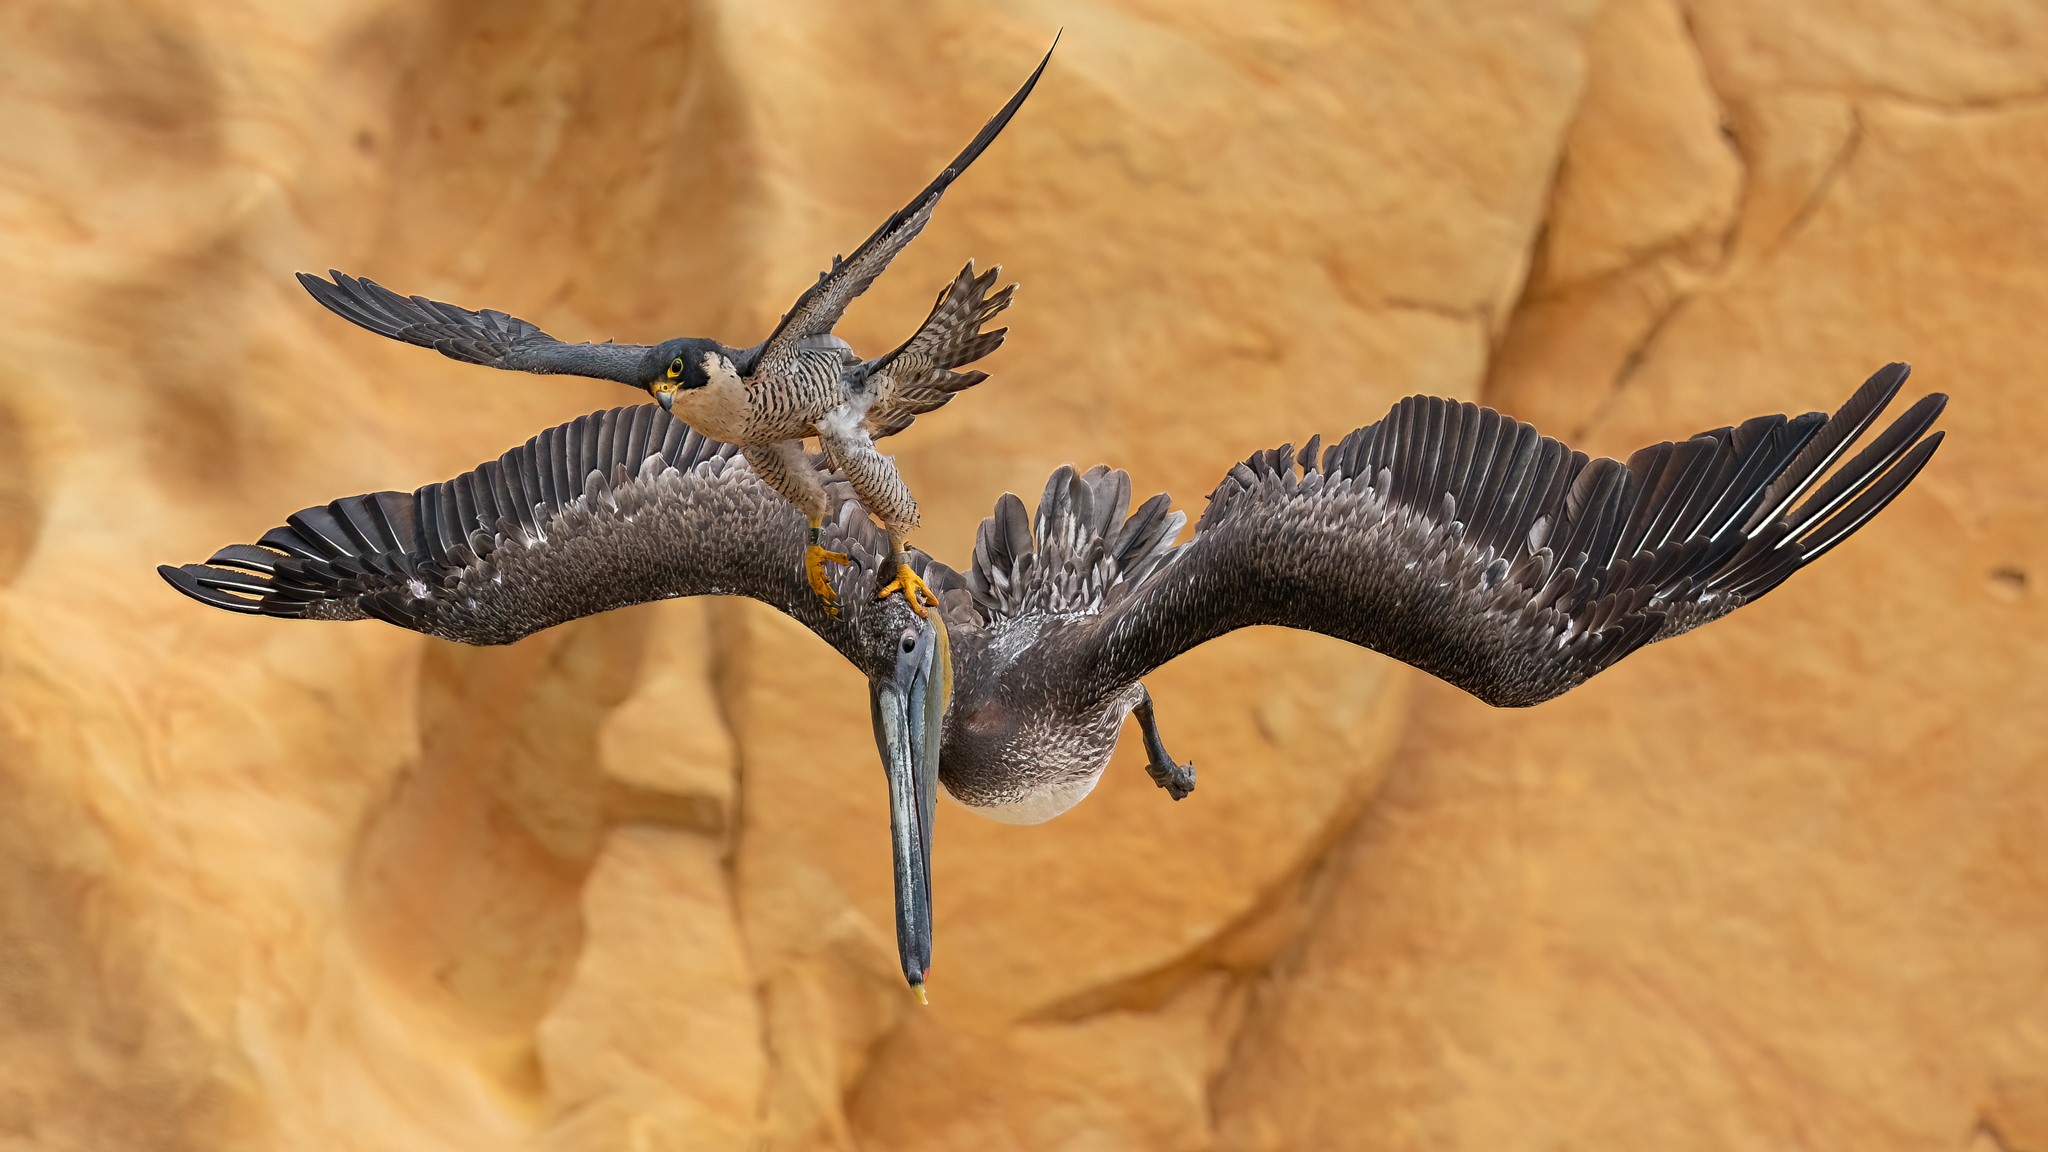 Moment falcon digs its talons into pelican’s head to protect its nest captured in incredible photo